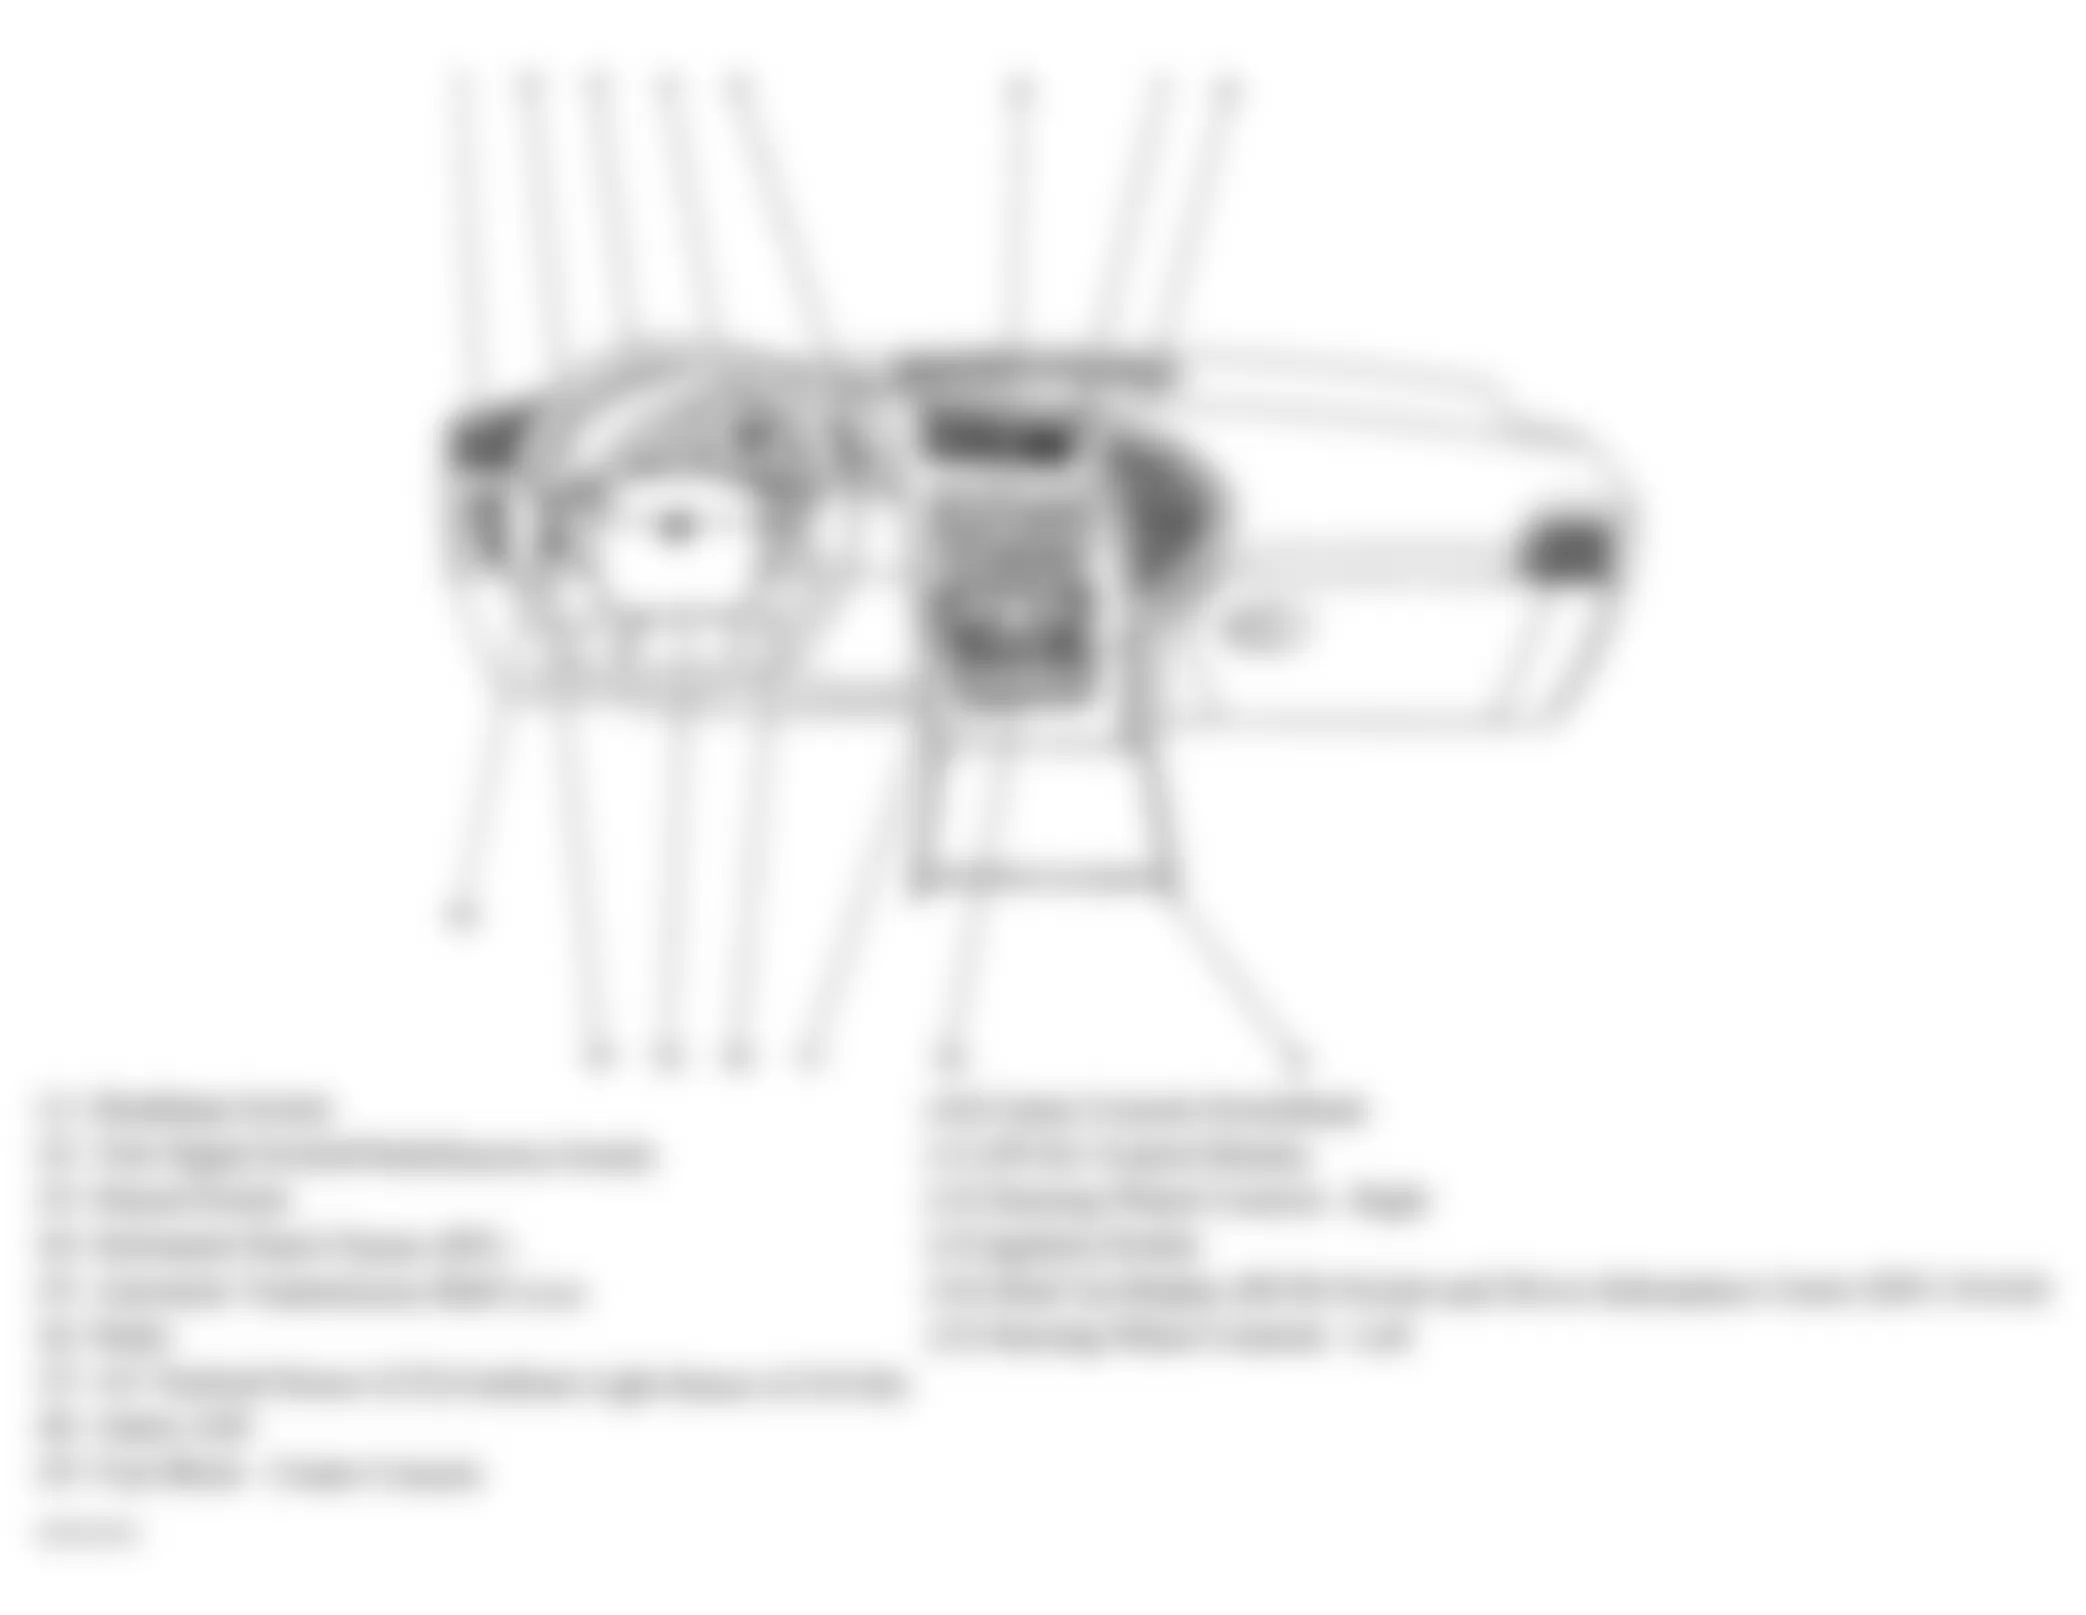 Buick Rendezvous Ultra 2004 - Component Locations -  Dash